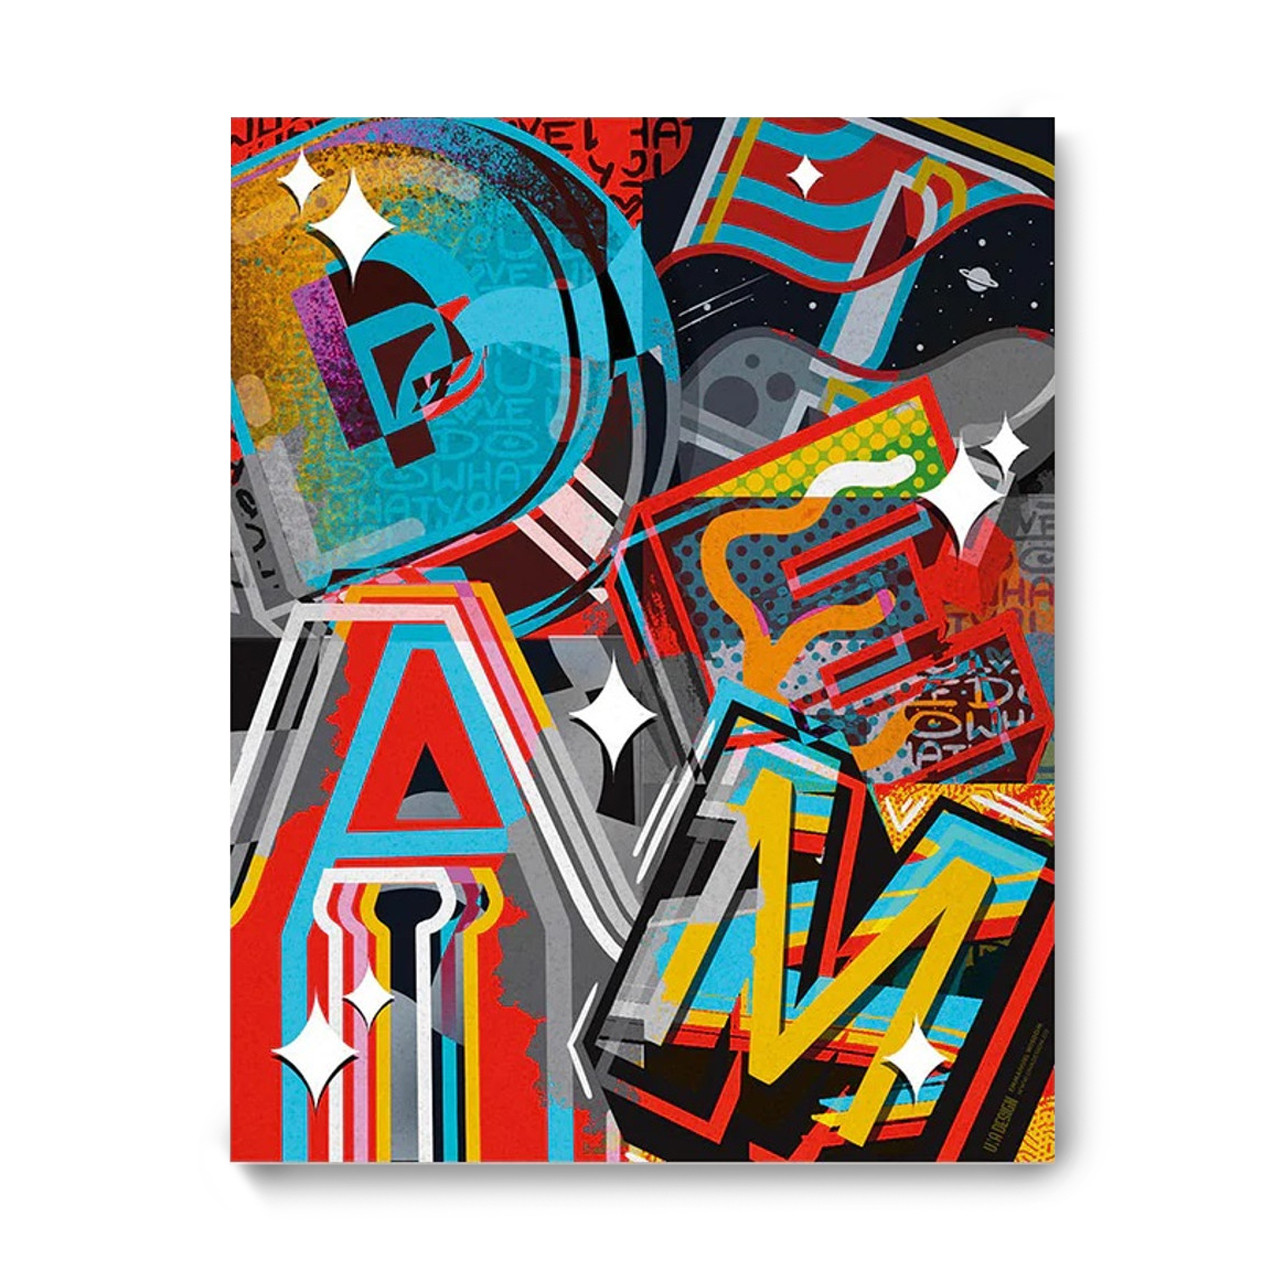 Graffiti Auguste Notebook Cover - Art of Living - Books and